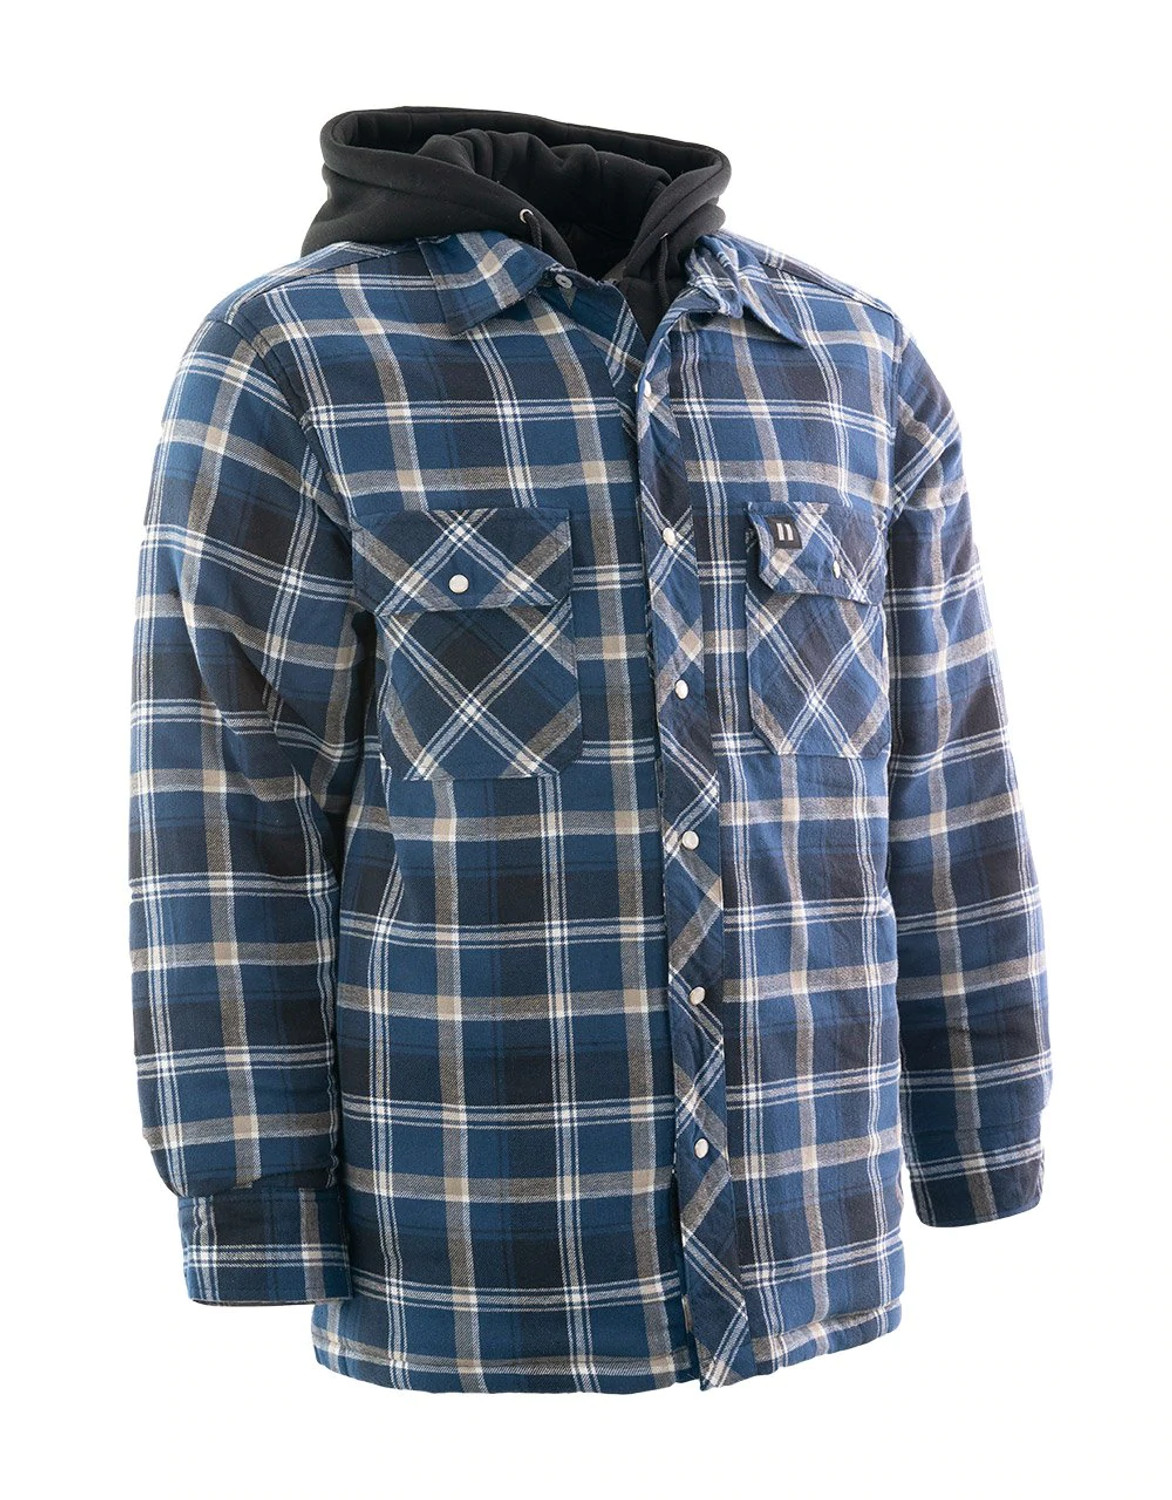 Forcefield Blue Plaid Hooded Quilted Flannel Shirt Jacket - M